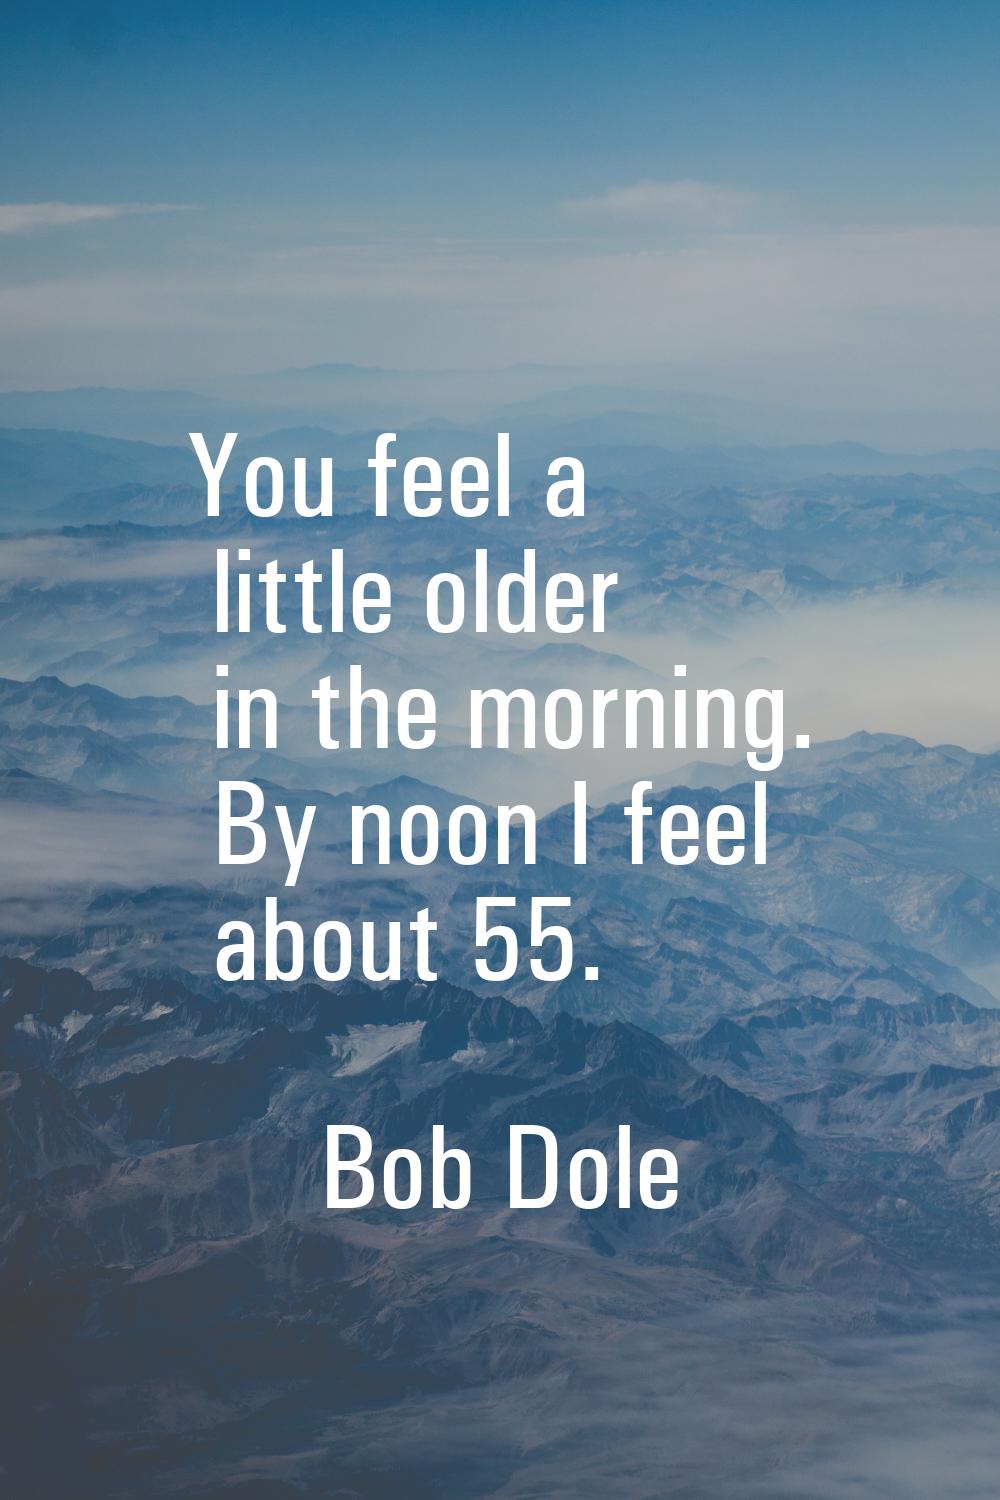 You feel a little older in the morning. By noon I feel about 55.